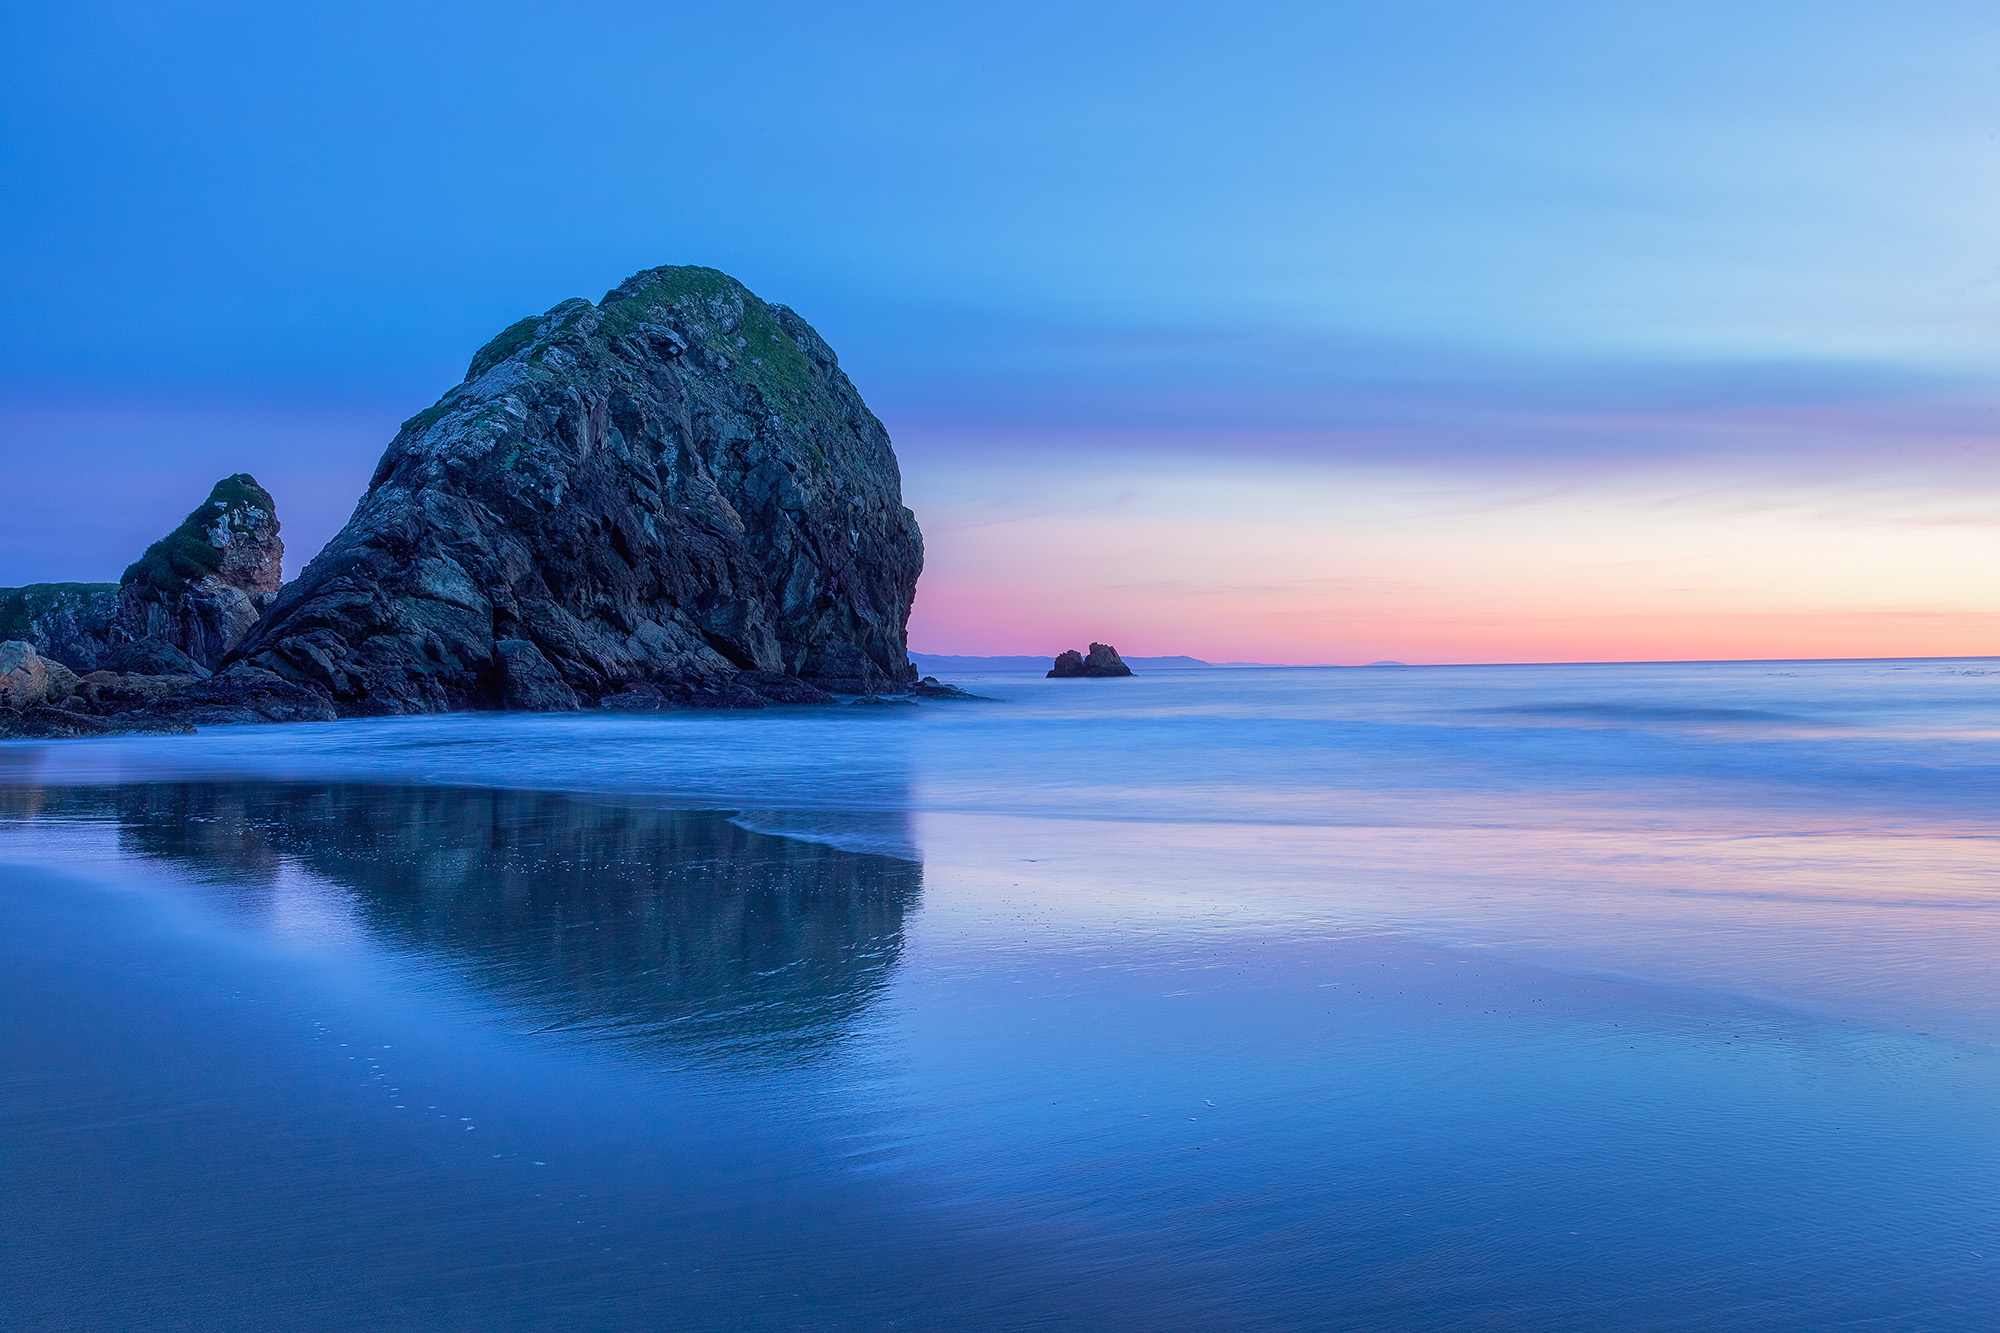 This image, captured near Brookings on the Oregon coast, frames the iconic Haystack Mountain against the sandy beach. A serene...